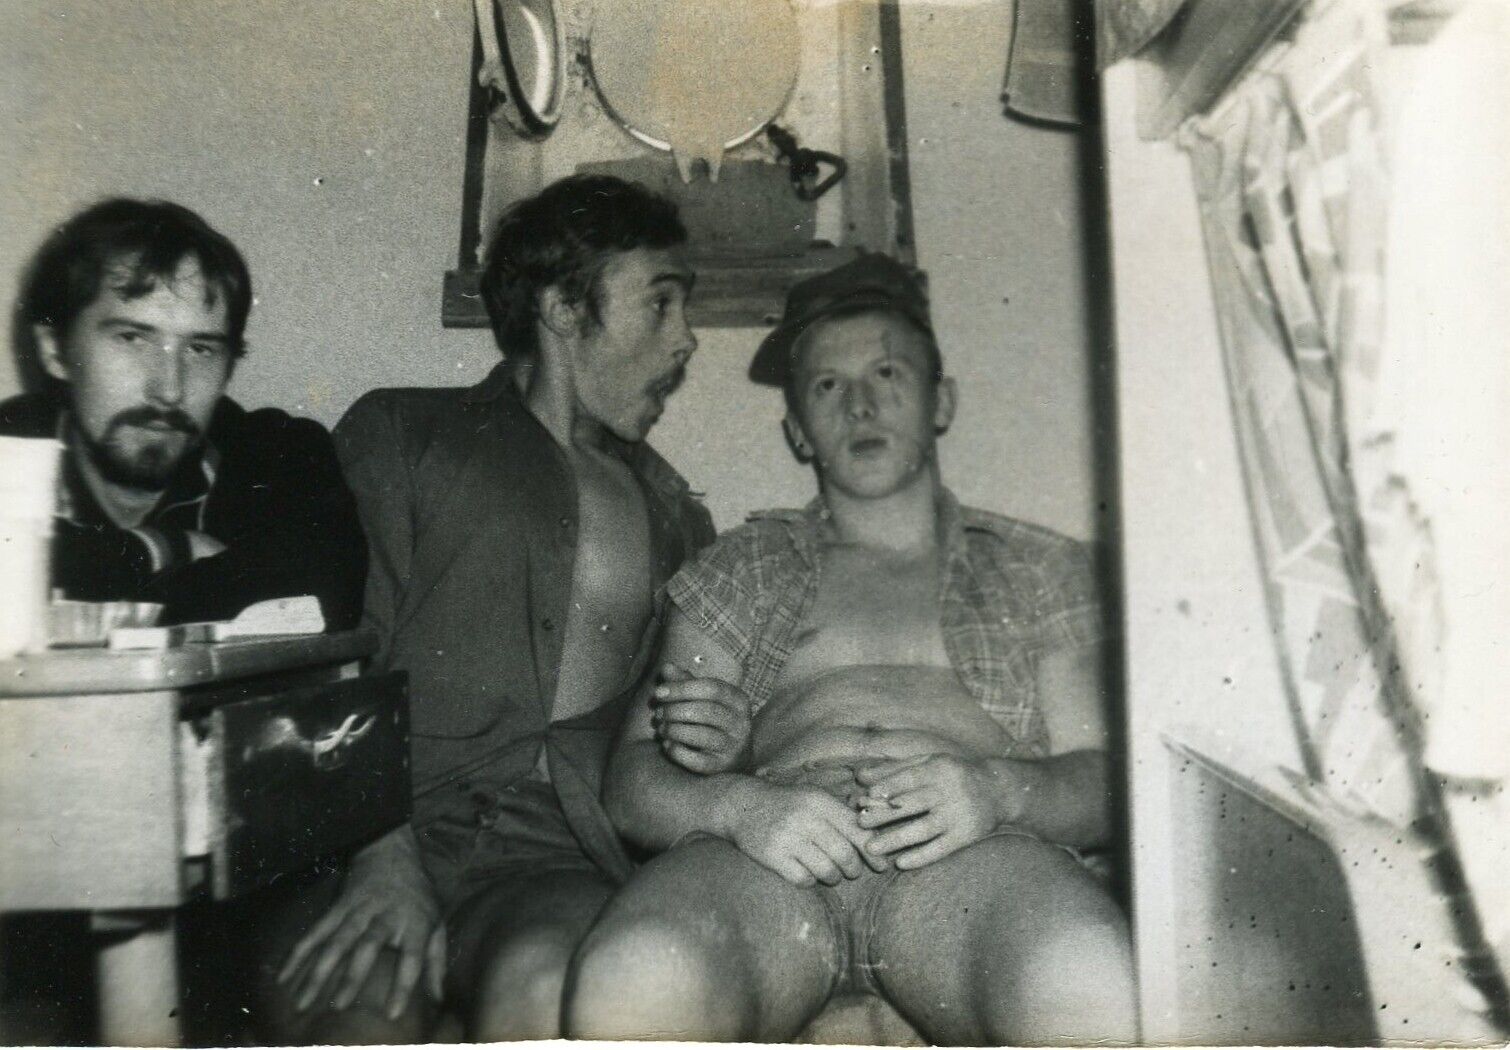 Shirtless Affectionate Handsome young men couple have fun odd gay int vtg photo